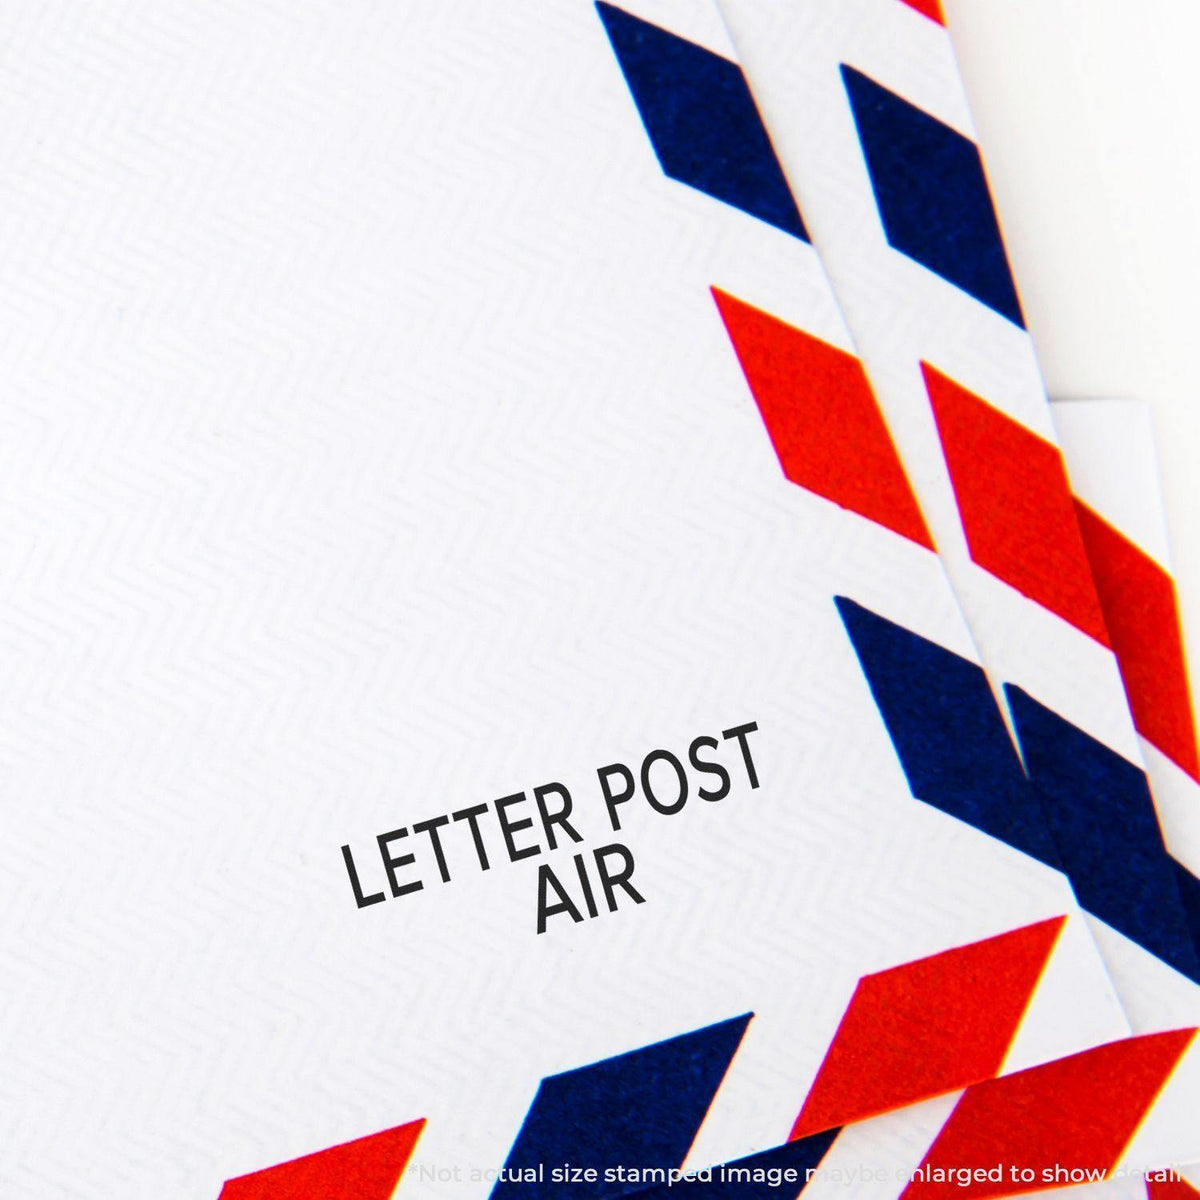 In Use Large Pre-Inked Letter Post Air Stamp Image